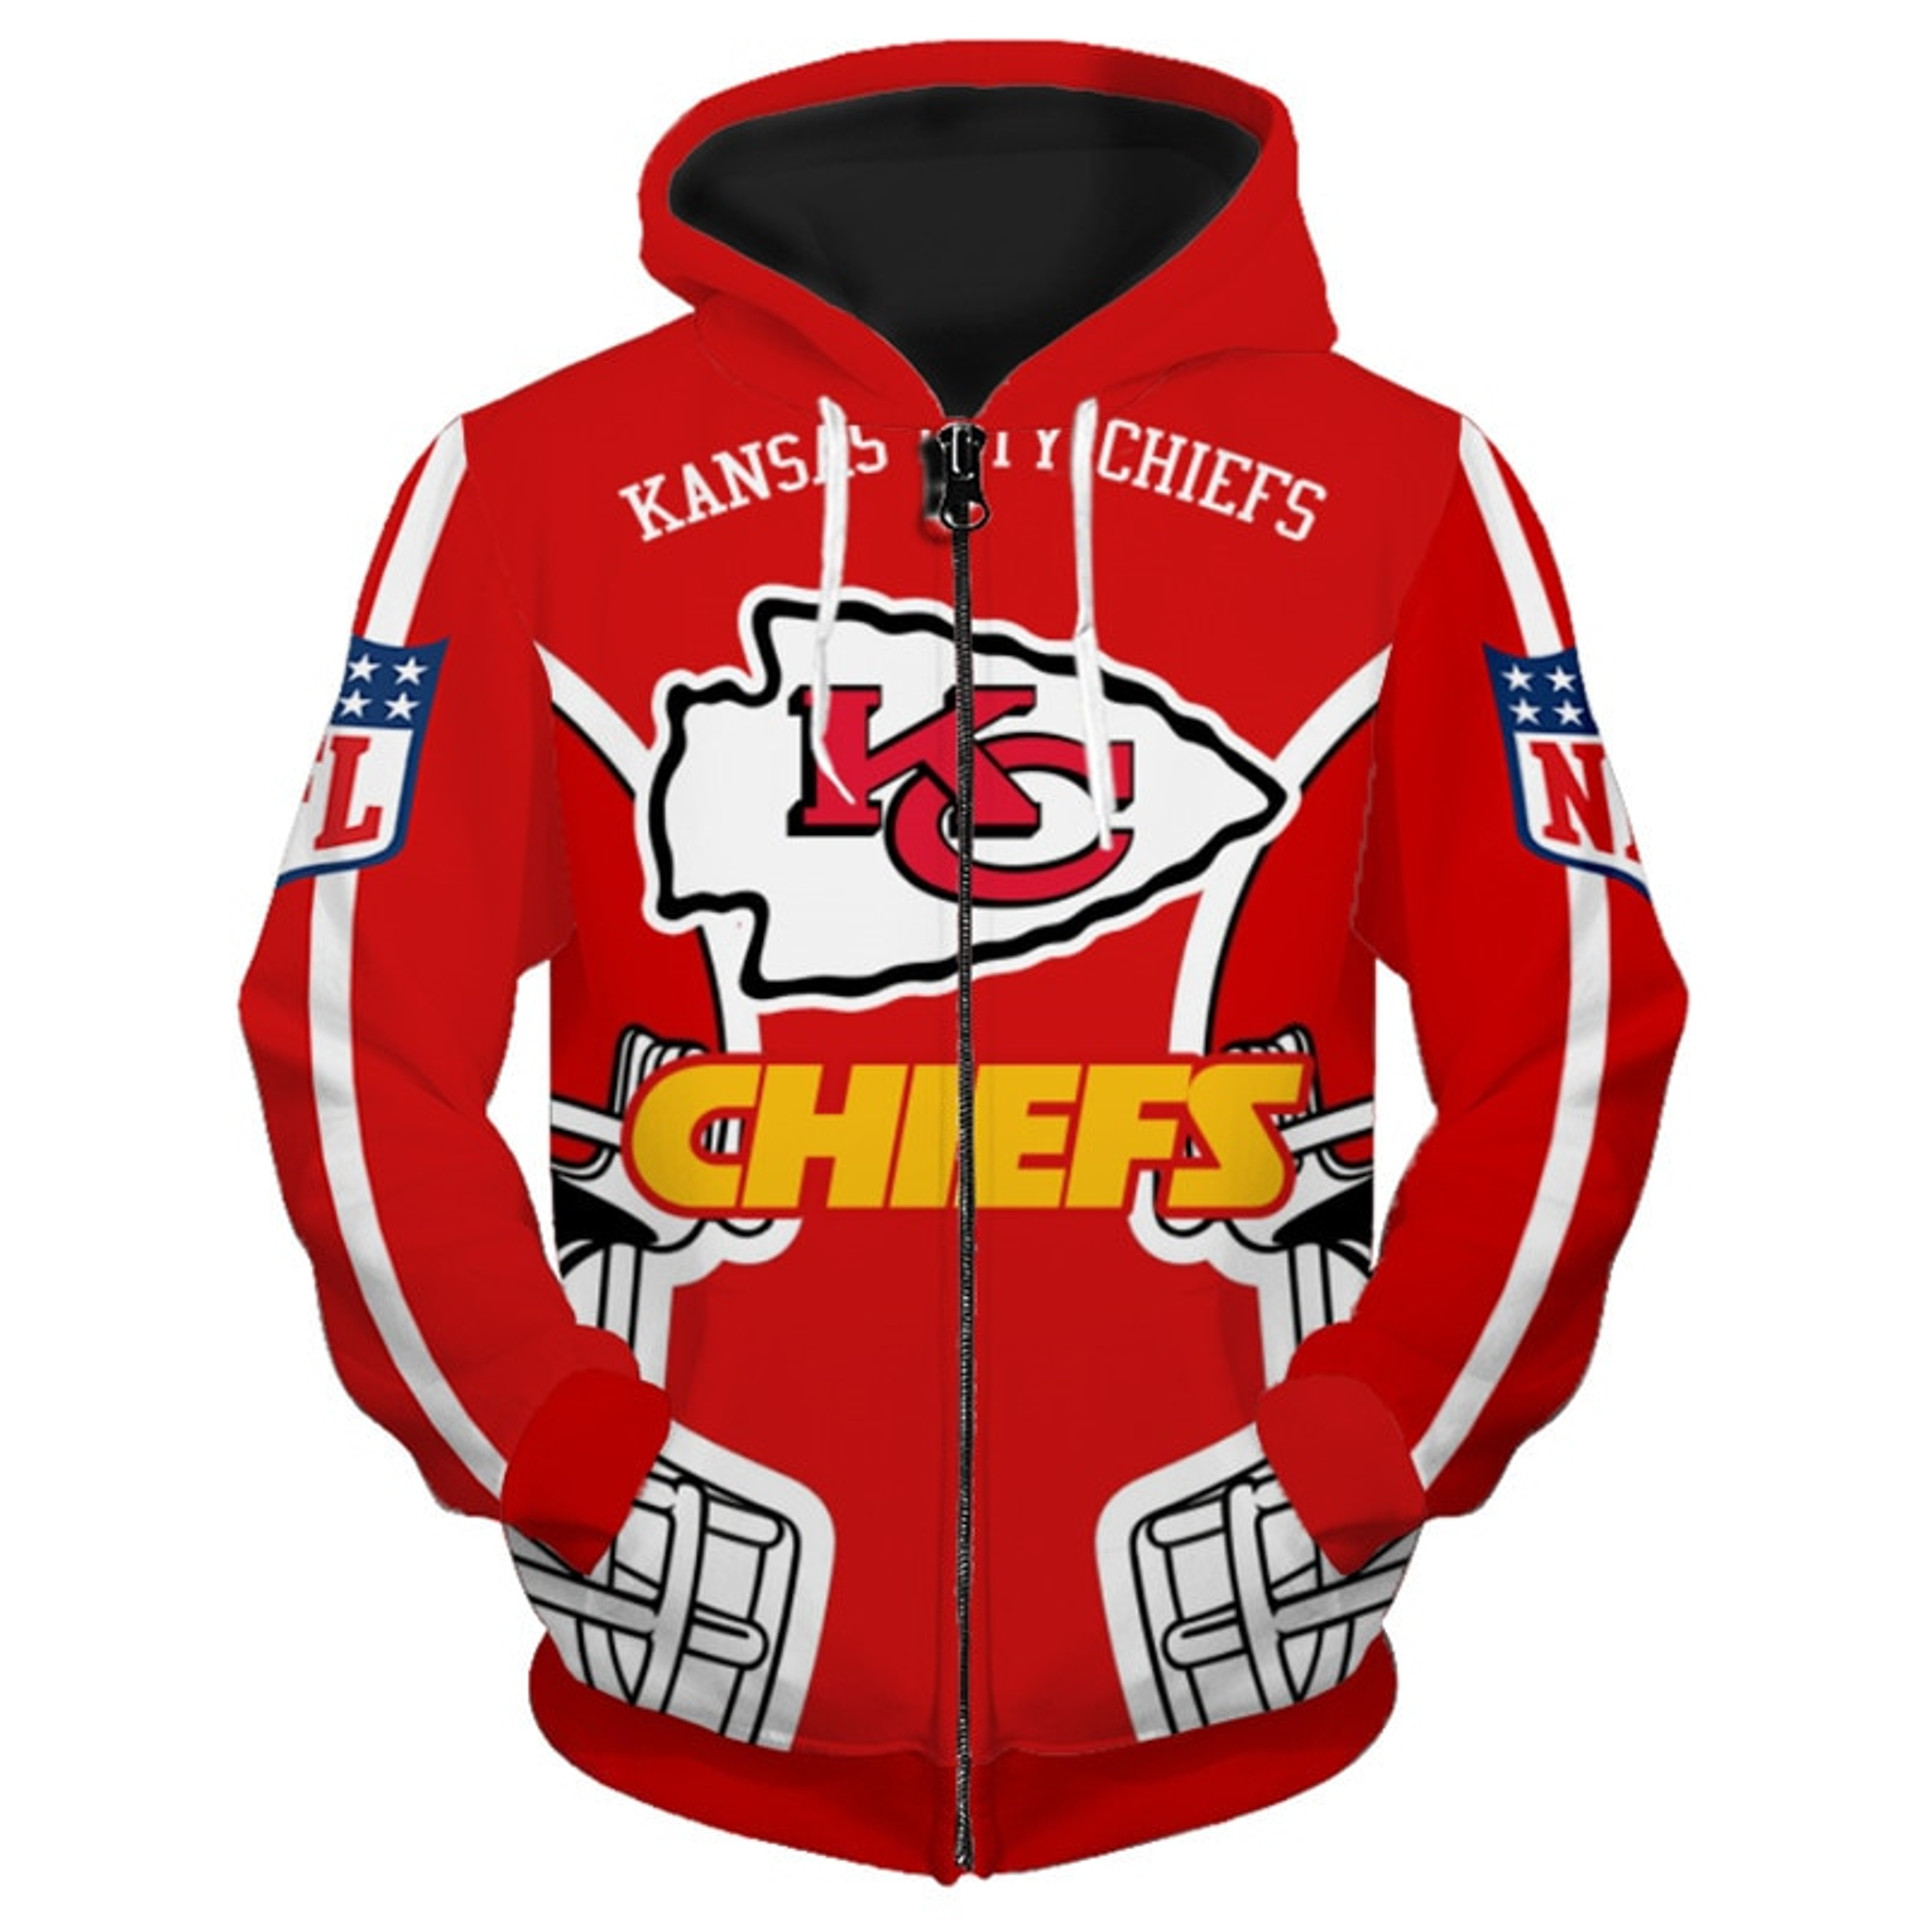 **(OFFICIALLY-LICENSED-N.F.L.KANSAS-CITY-CHIEFS-ZIPPER-UP-HOODIES/ALL-OVER-3D-GRAPHIC-PRINTED-IN